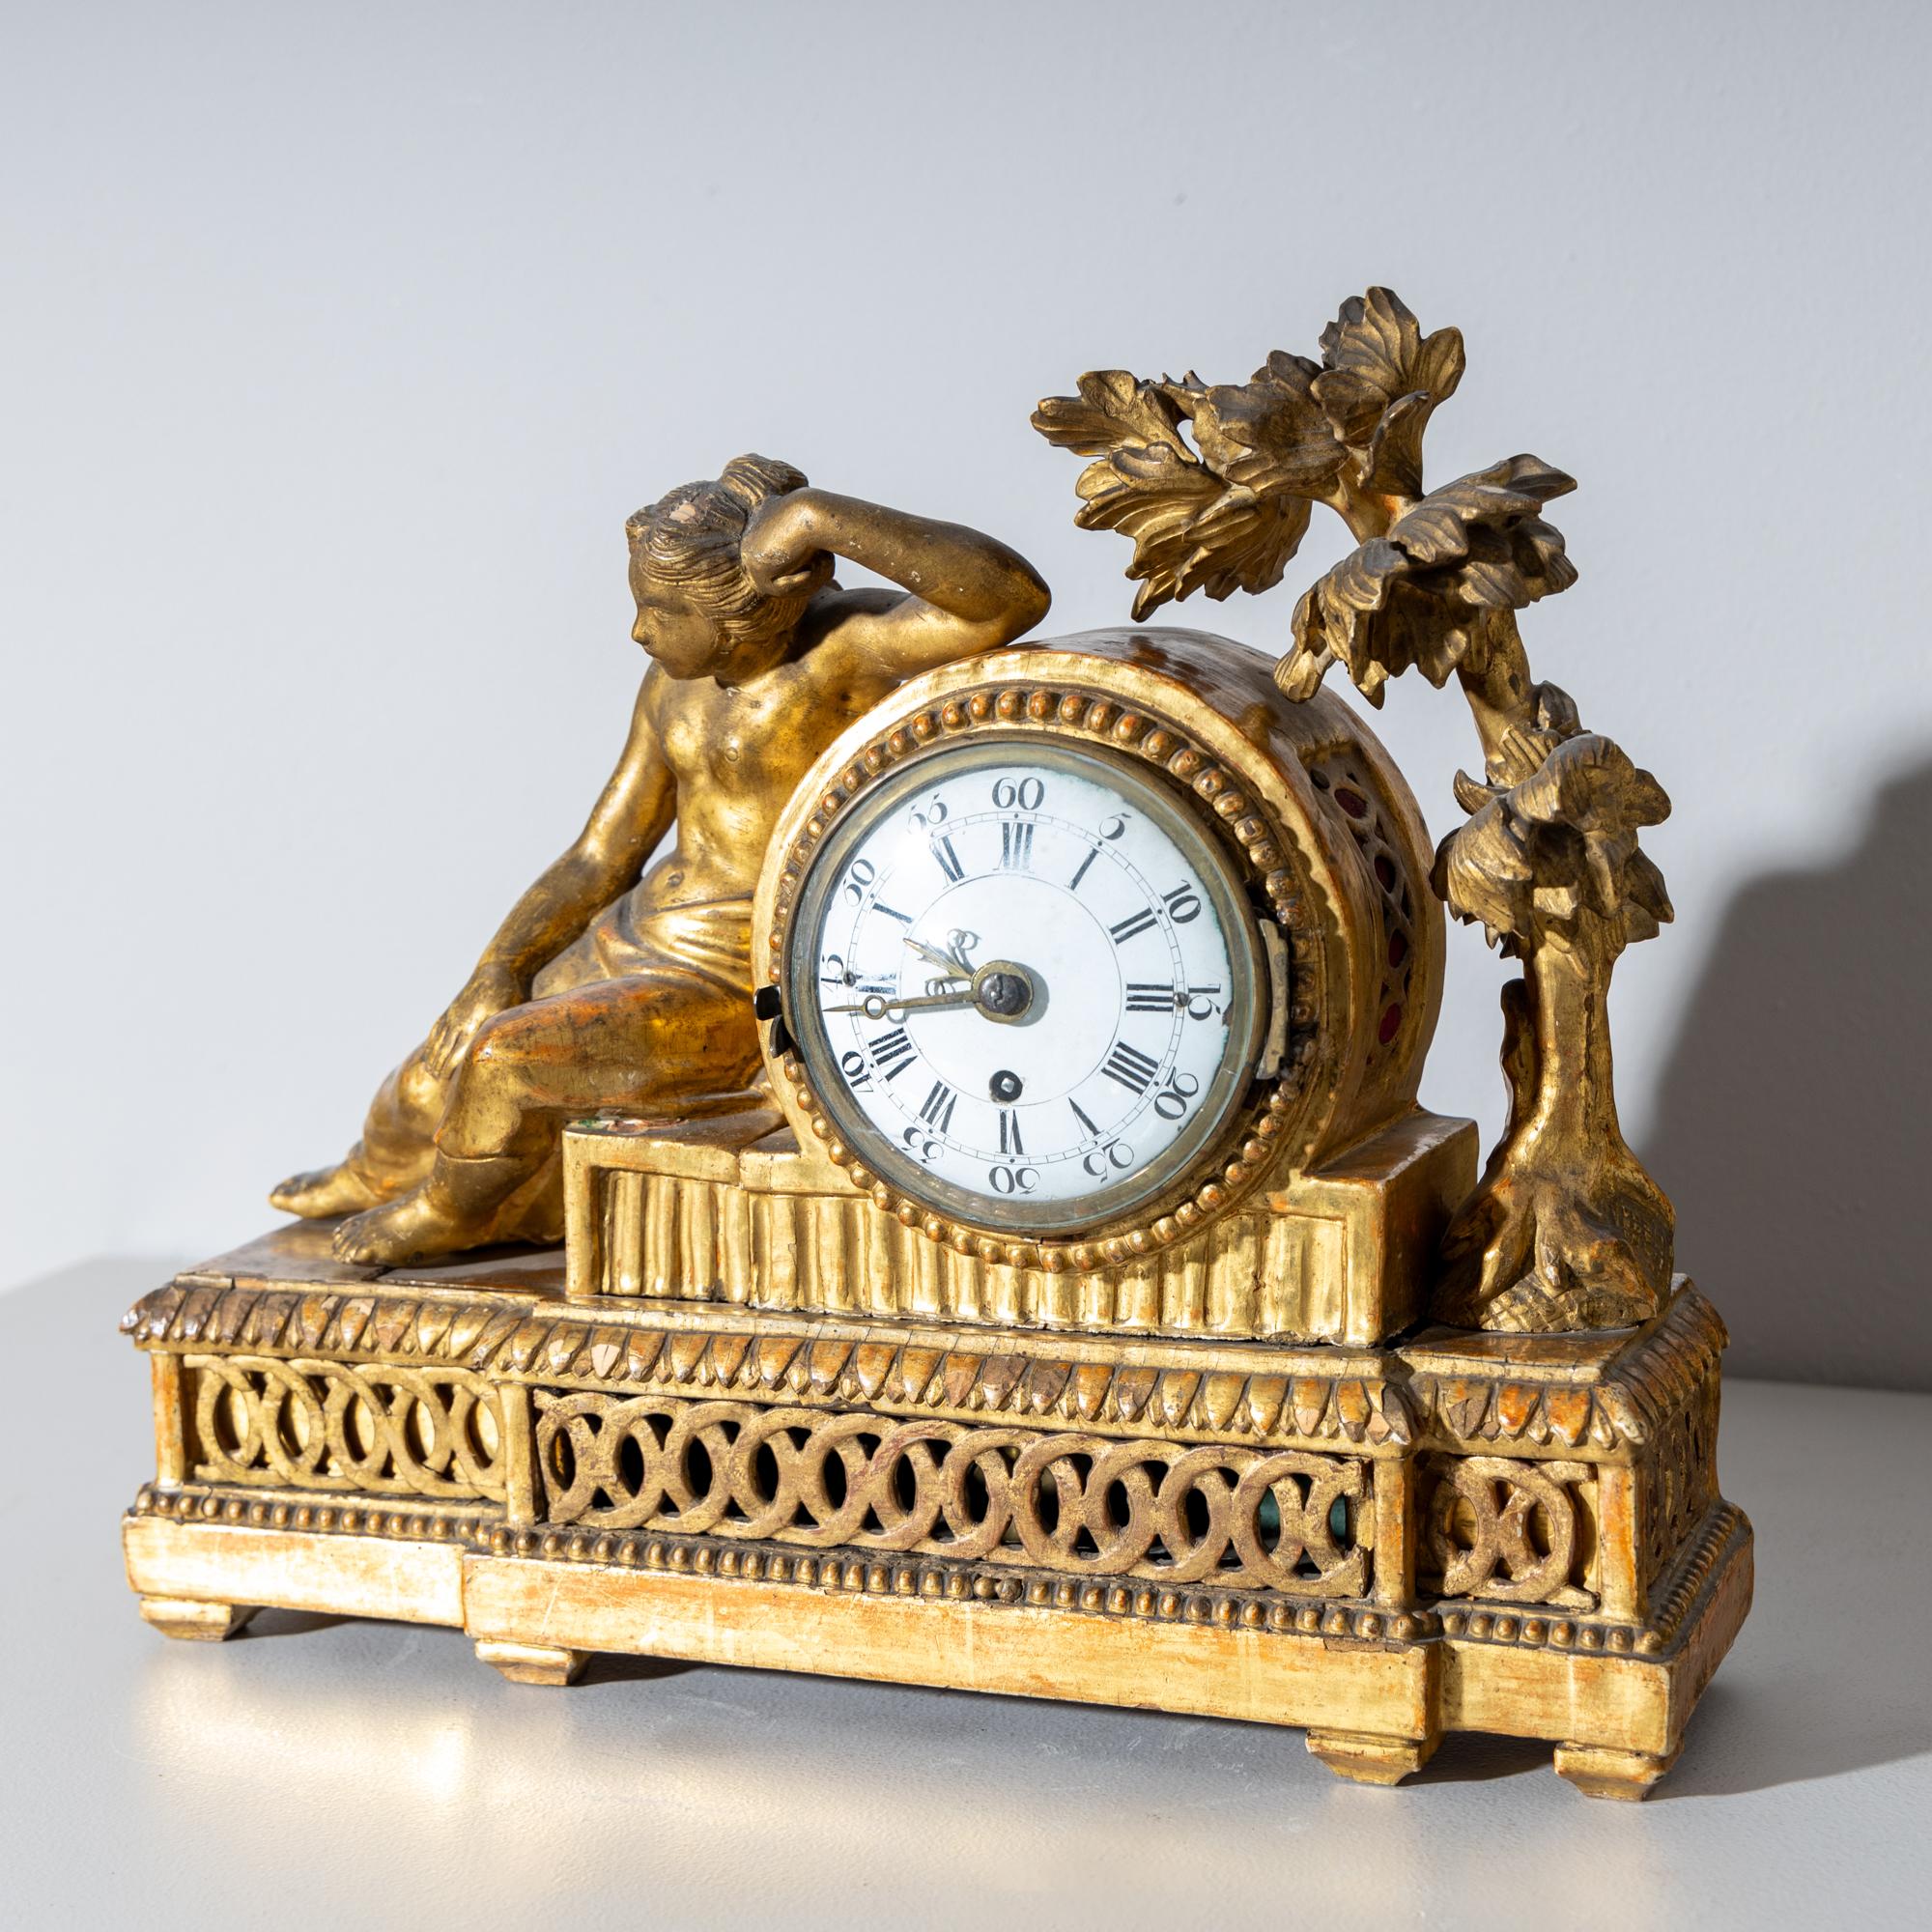 French Louis Seize Mantel Clock in a Giltwood Case, End of 18th Century For Sale